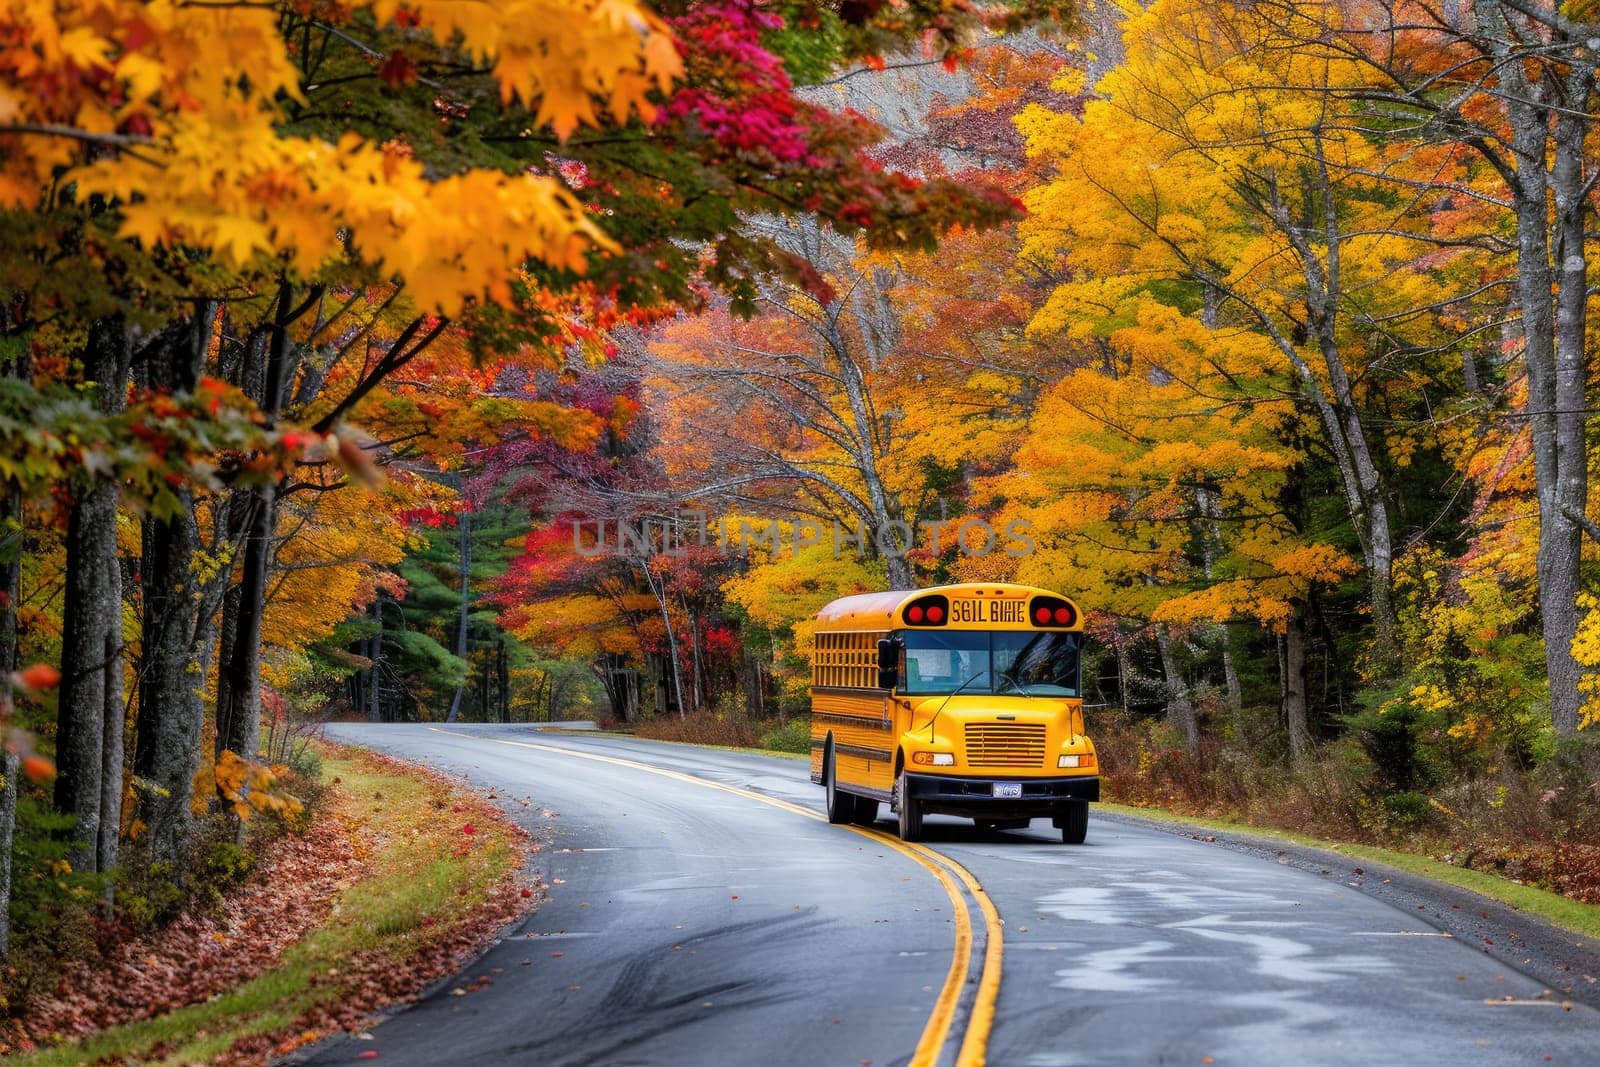 Bright yellow school bus drives along a scenic country road with vibrant fall foliage lining the way